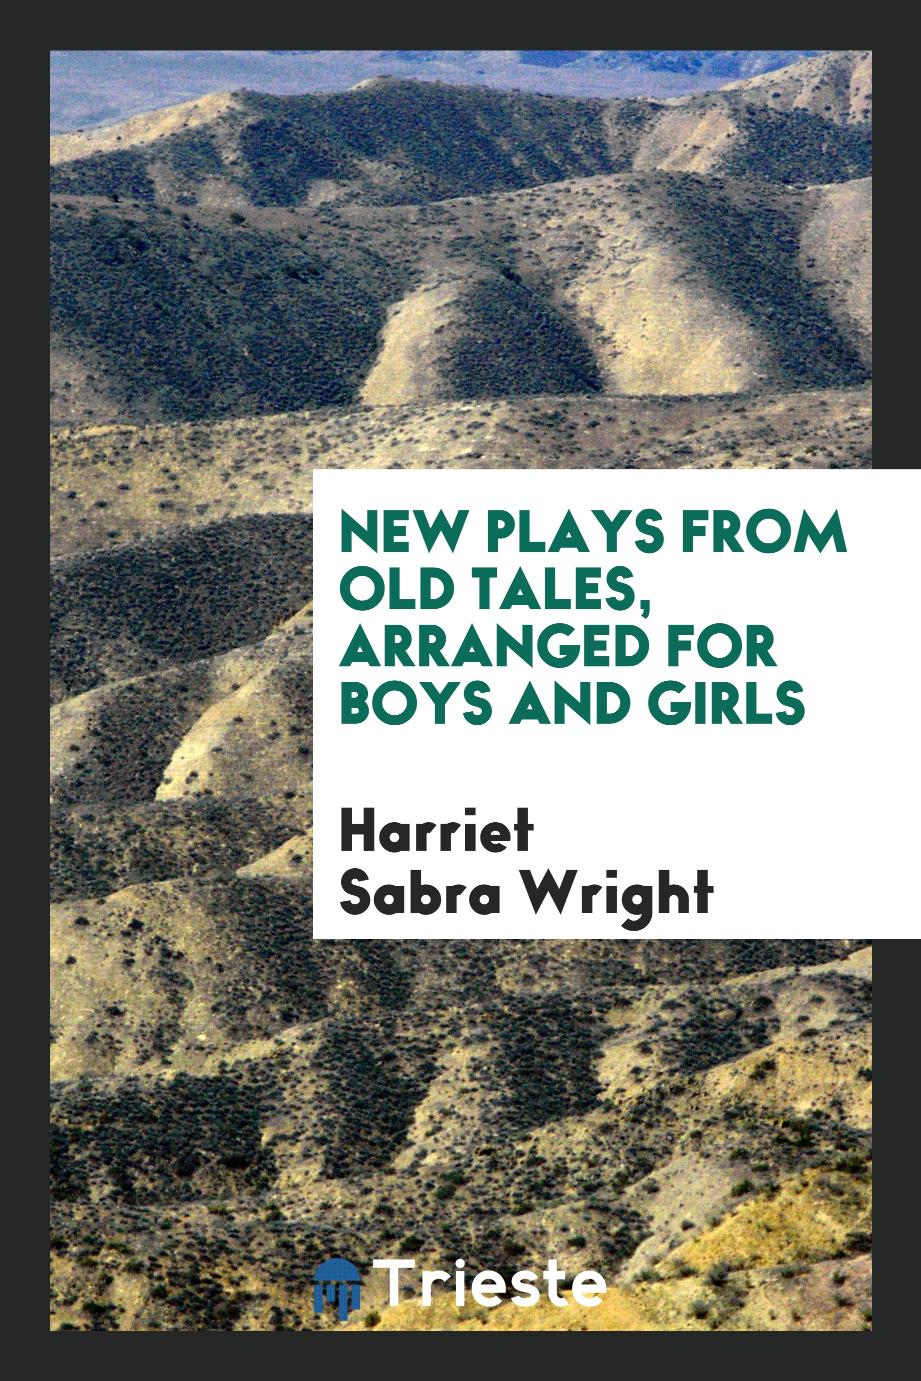 New plays from old tales, arranged for boys and girls